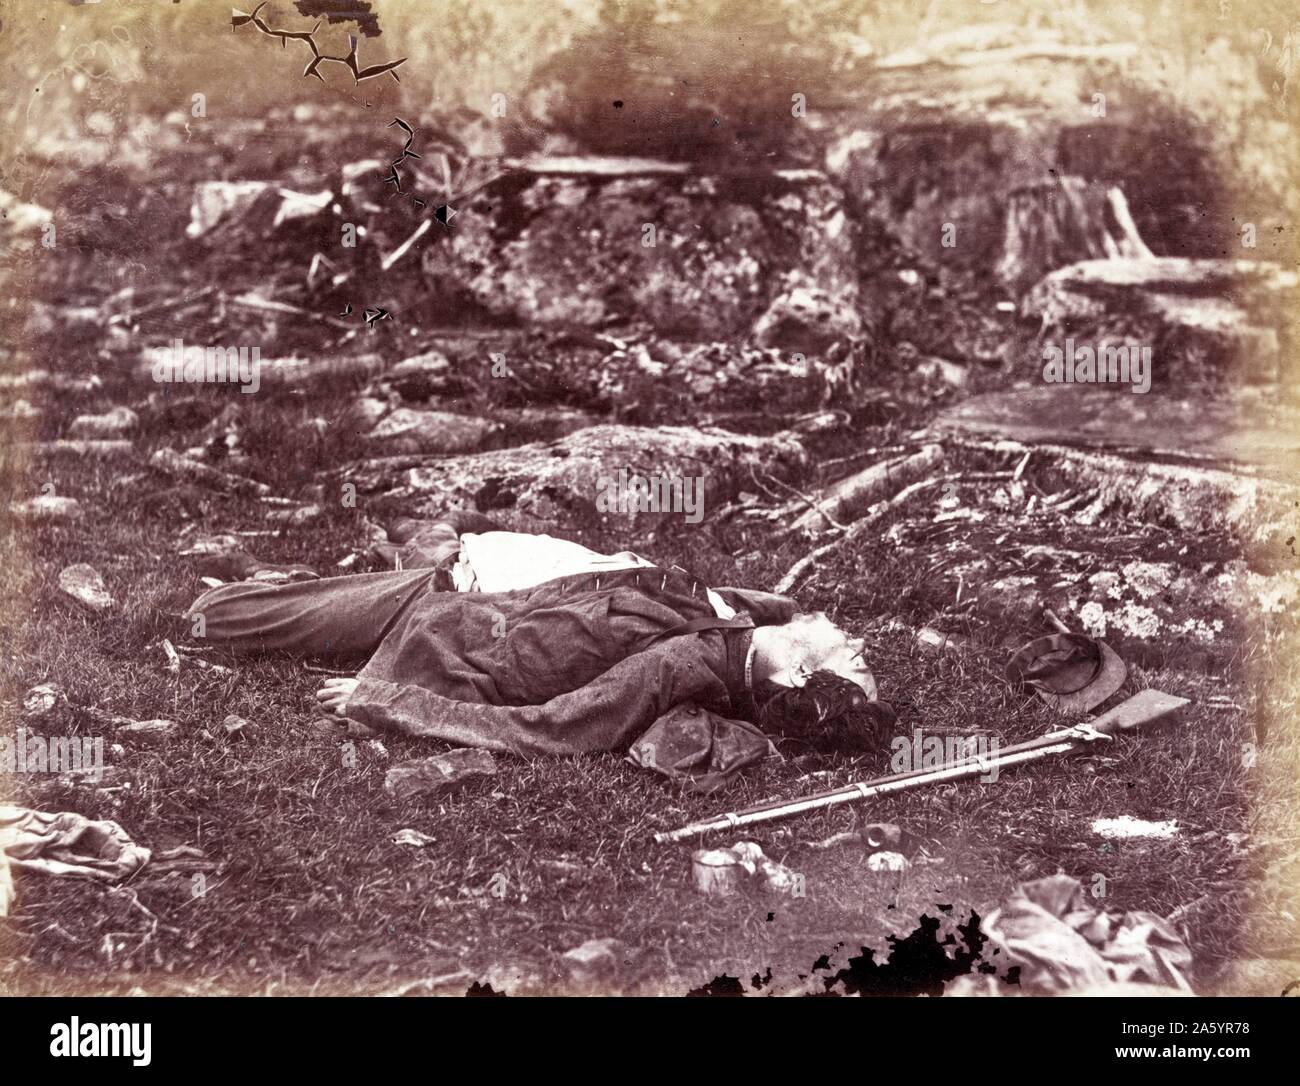 Photomechanical print of a deceased sharpshooter during the Battle of Gettysburg. The Battle of Gettysburg lasted from July 1ñ3, 1863, in and around the town of Gettysburg, Pennsylvania, by Union and Confederate forces during the American Civil War. Photographed by Alexander Gardner (1821-1882) Scottish photographer who emigrated to the United States. Dated 1863 Stock Photo